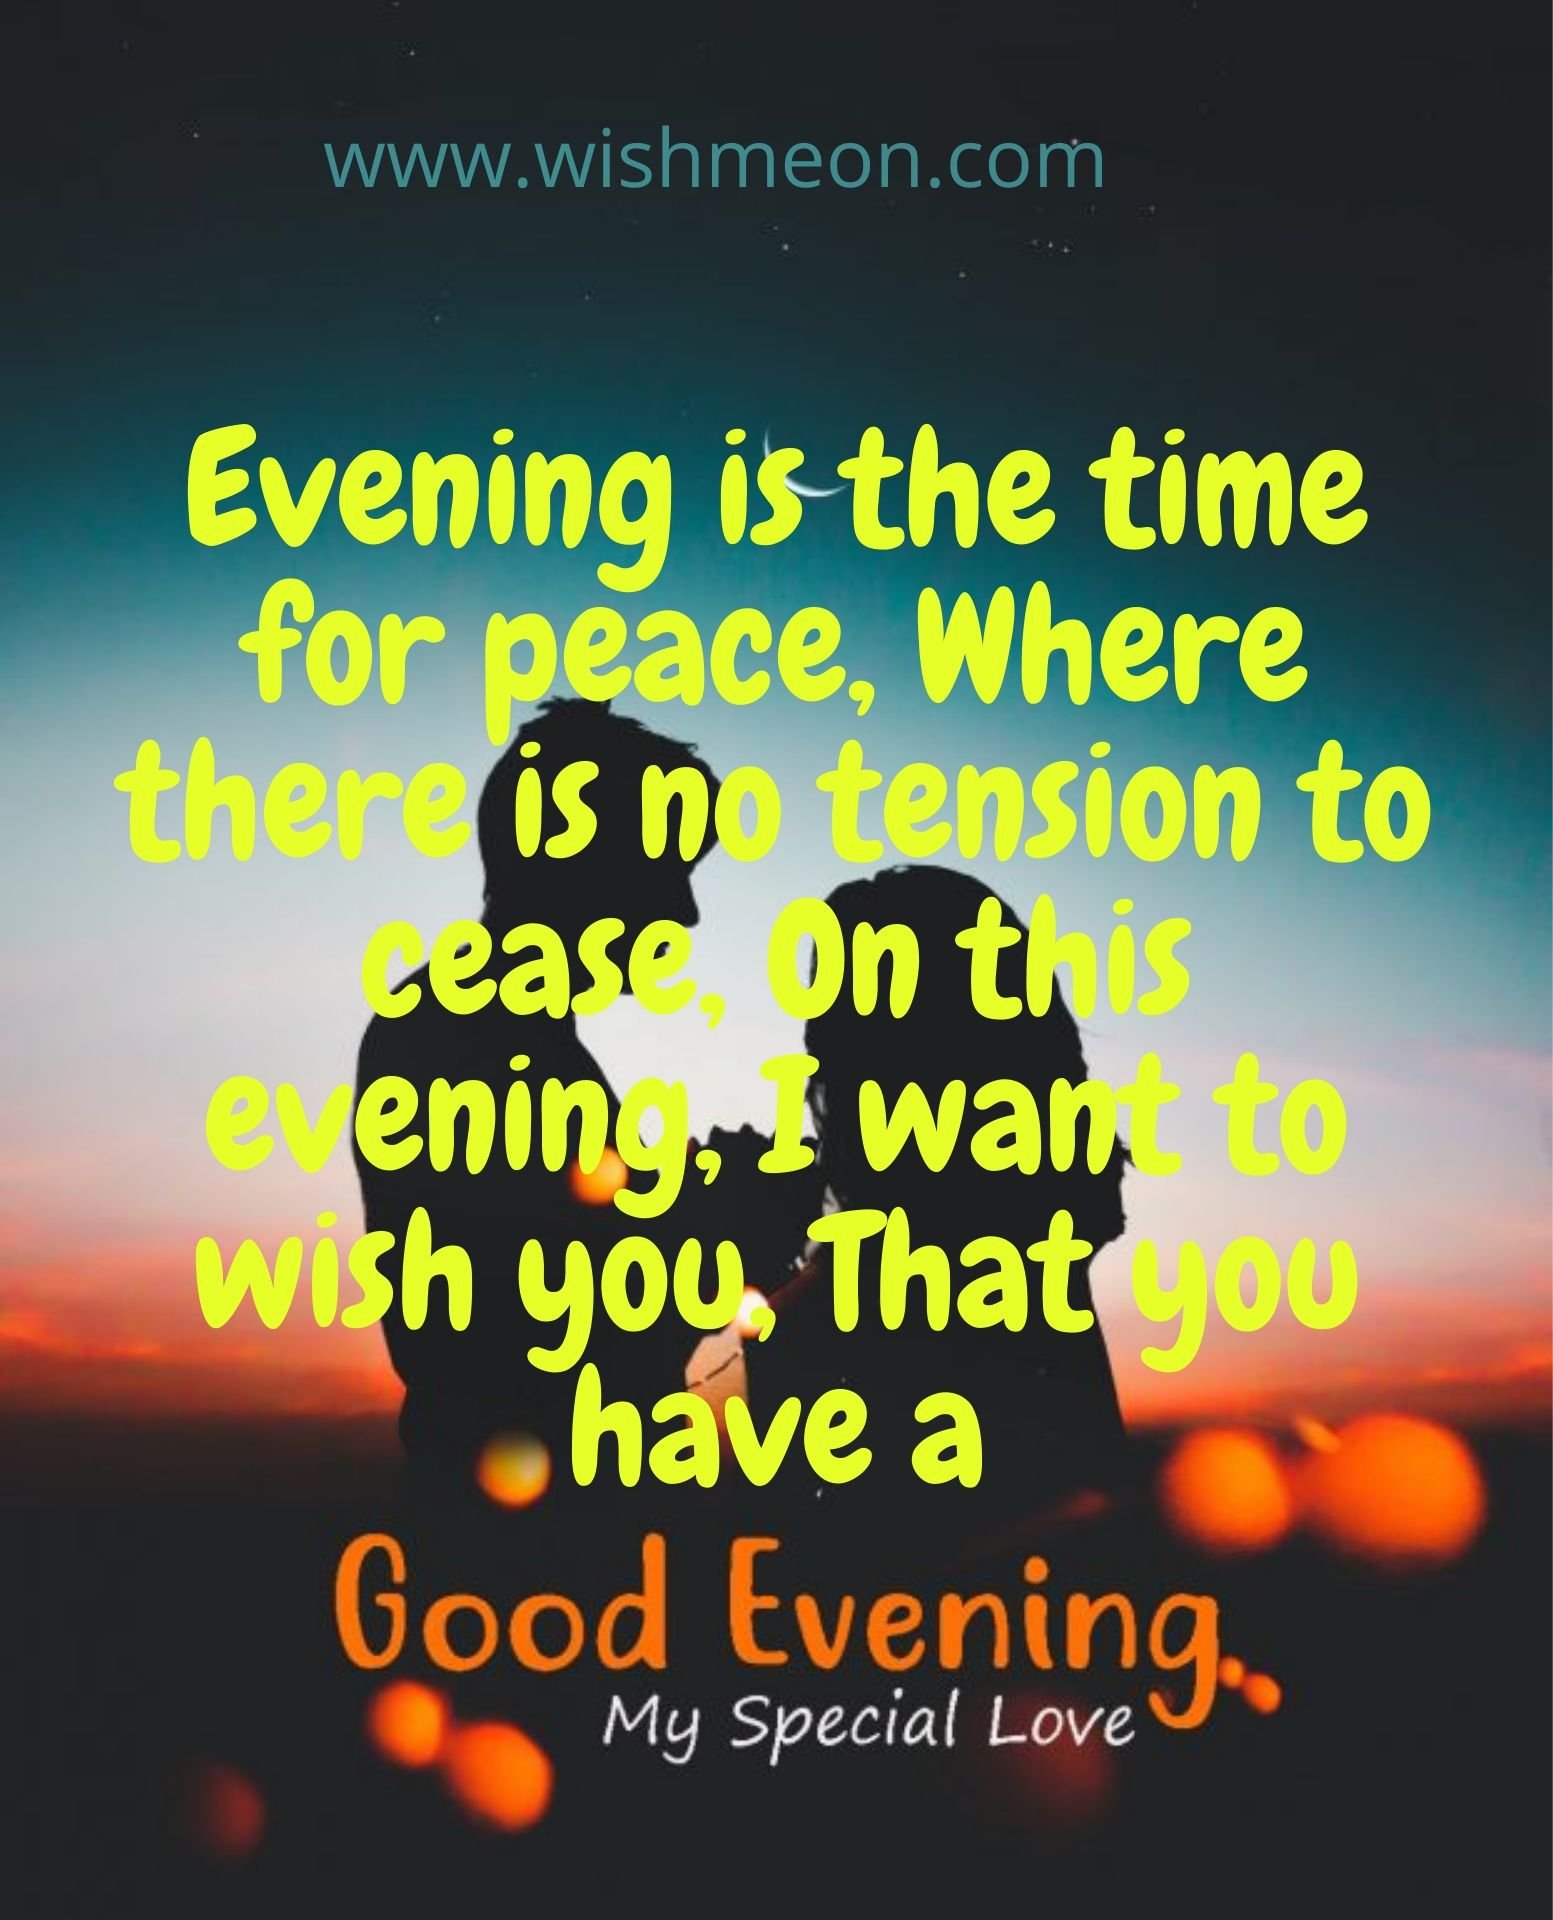 Evening Is The Time For Peace Where There Is No Tension To Cease